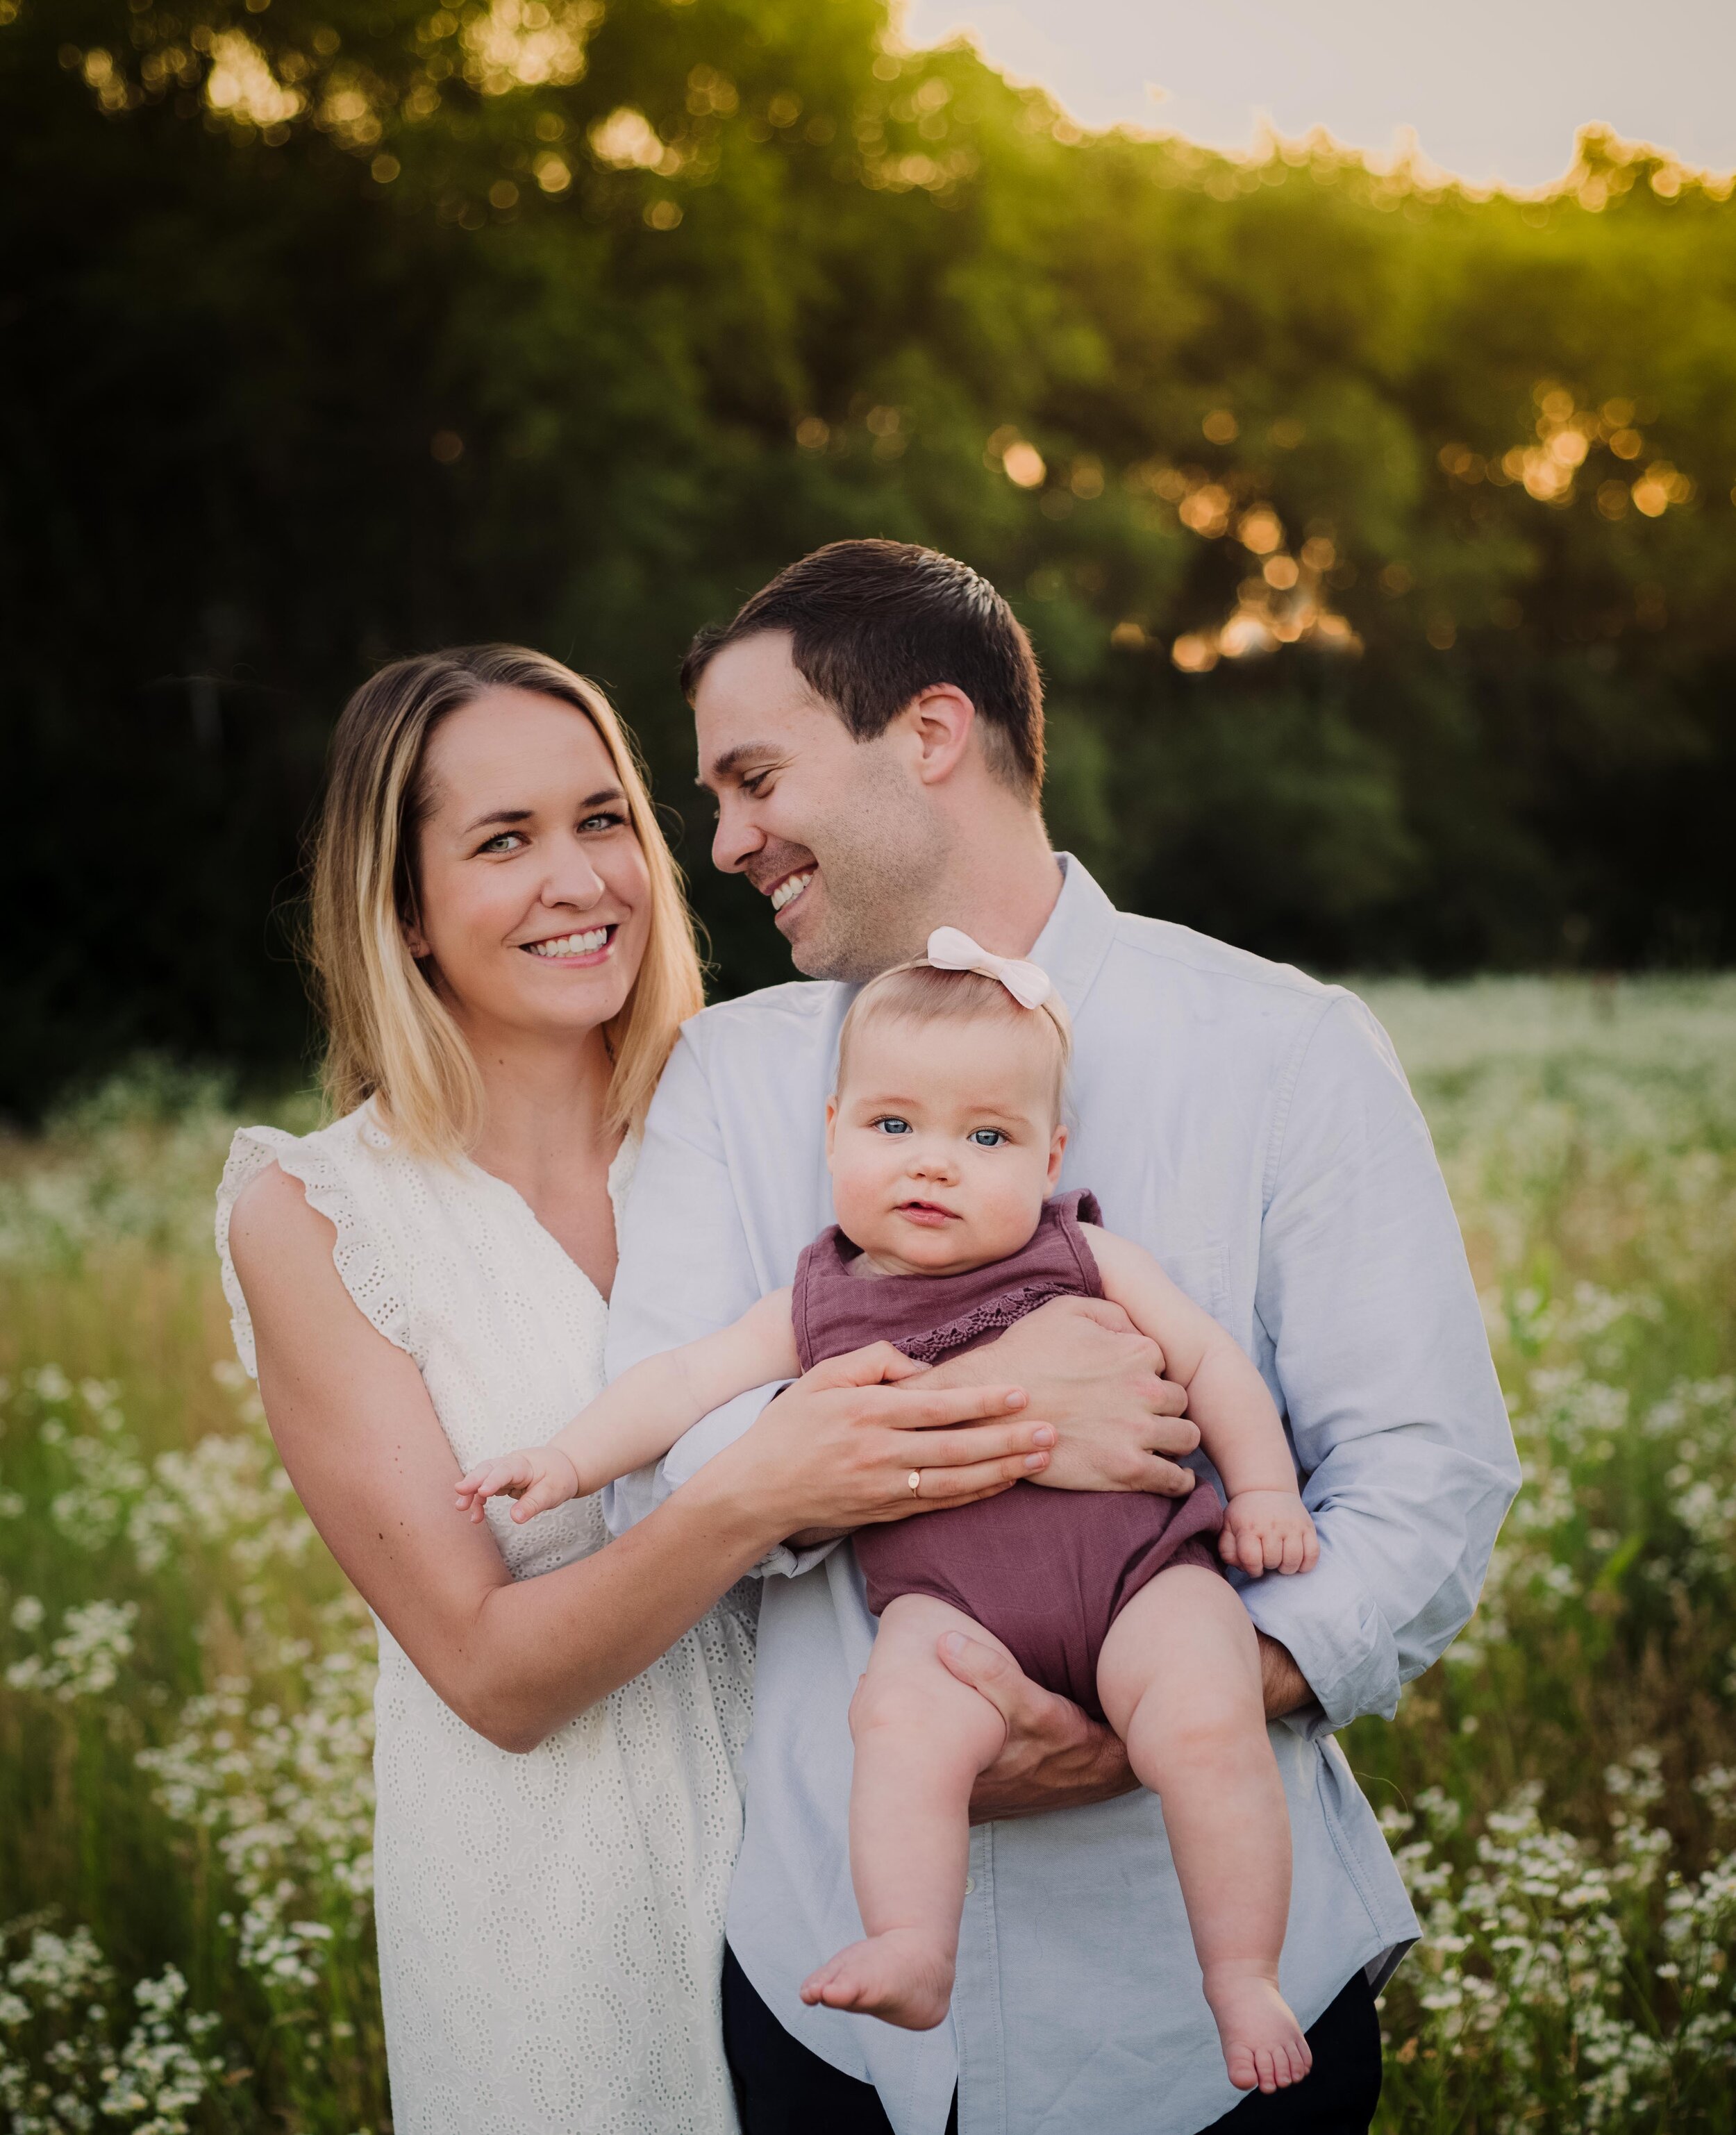 Family outfit ideas for your family pictures. Mom in a white lace dress, baby in a purple romper from Bloom Kids Collection and dad in a light blue button down shirt with sleeves rolled in West Lafayette, Indiana with Kelly McPhail Photography.